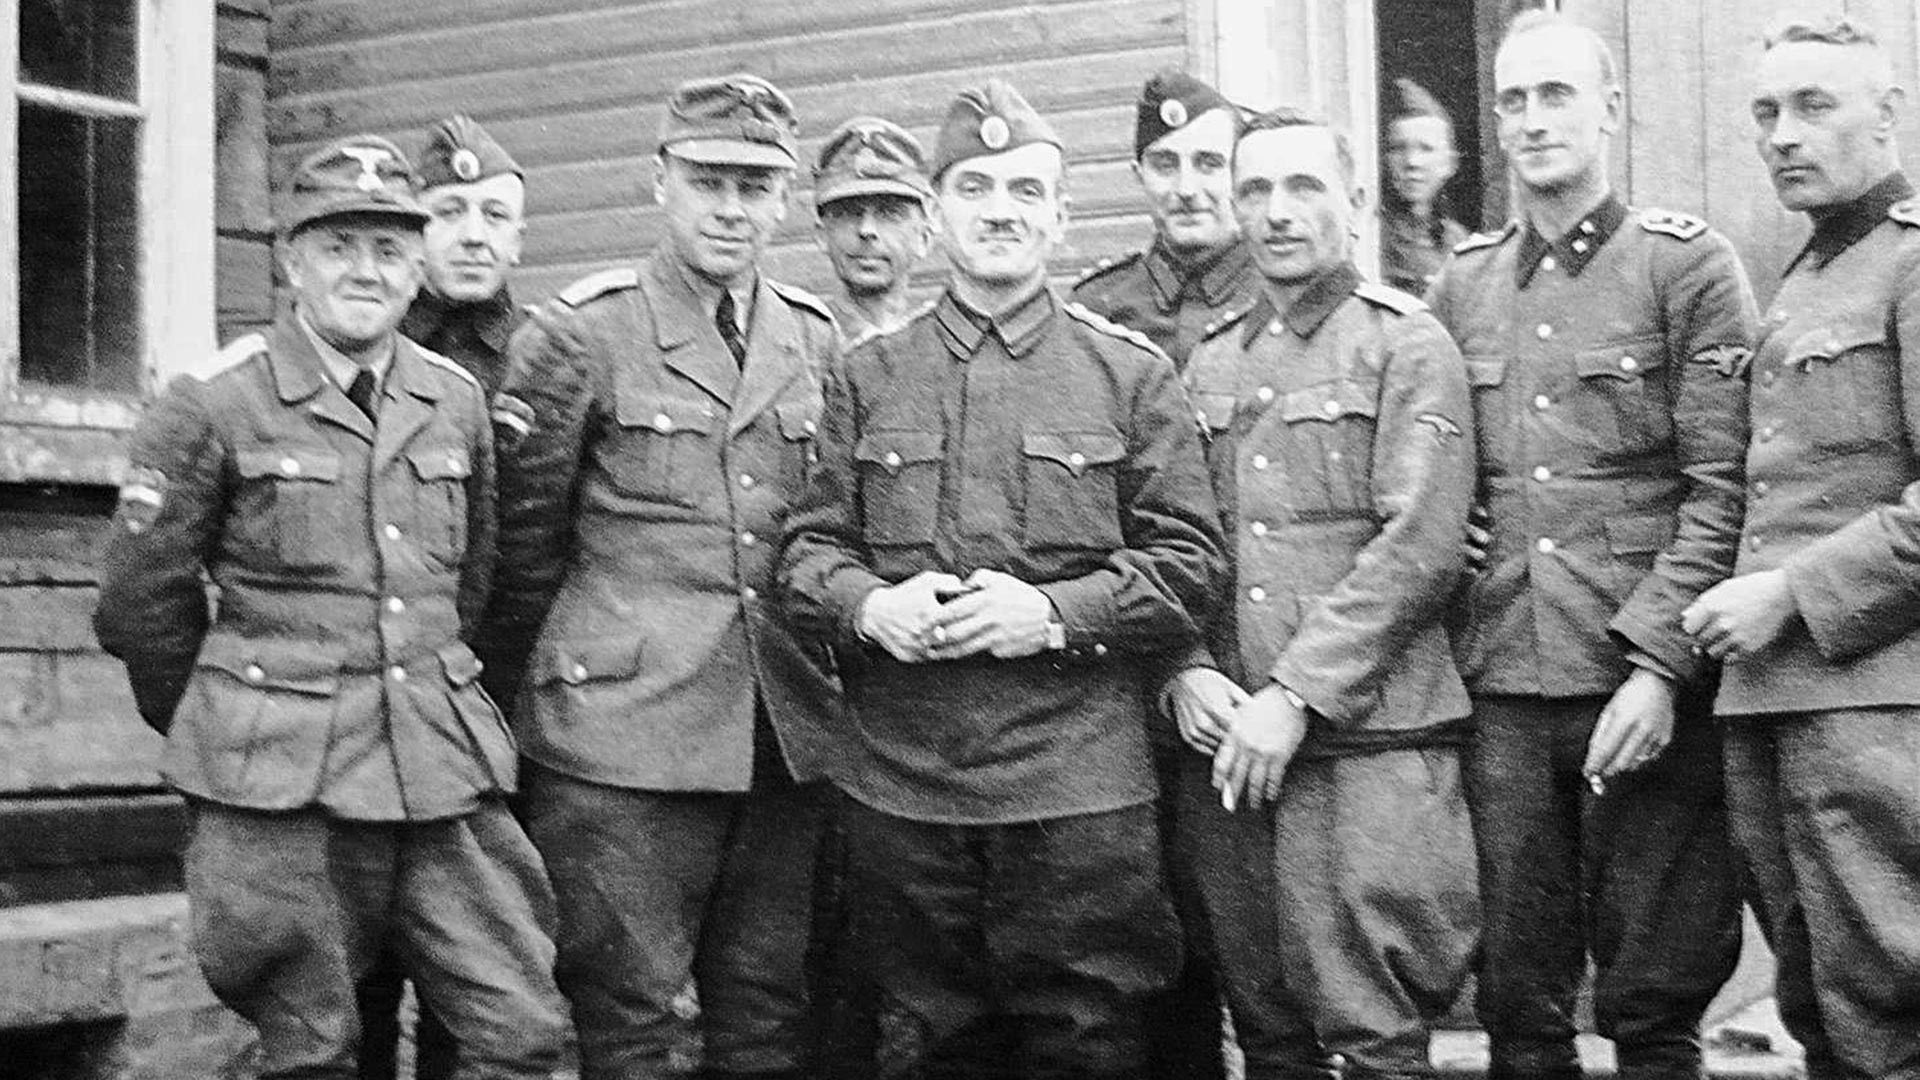 Colonel Constantine Kromiadi (C), Vladimir Gil (next to him), and officers of the Druzhina brigade.